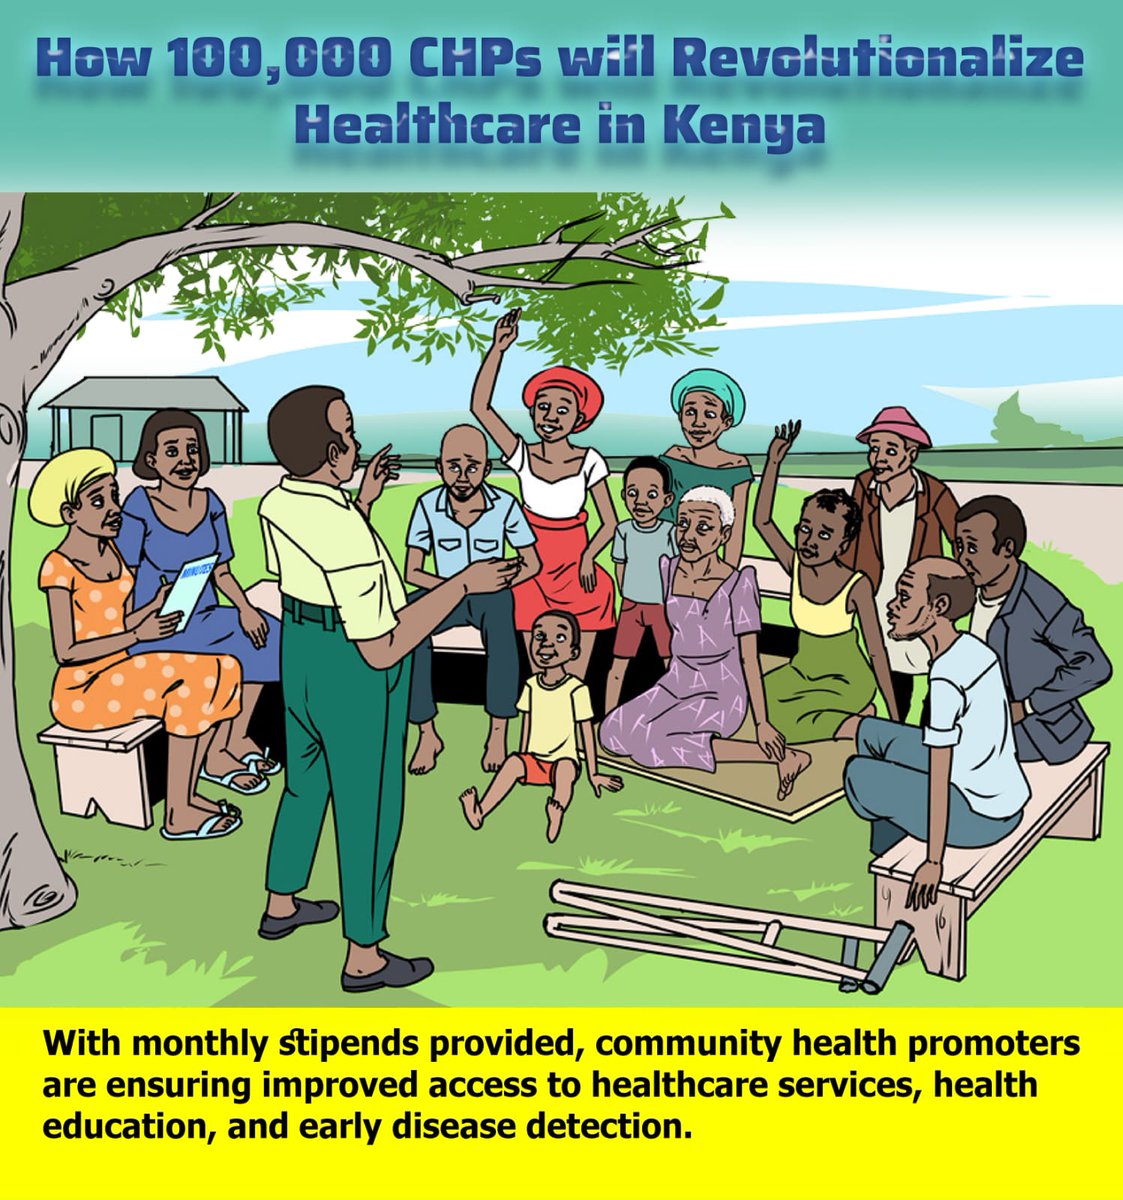 Improving Healthcare Access and Education*
With monthly stipends provided, community health promoters are ensuring improved access to healthcare services, health education, and early disease detection.
#RutoHealthcareInitiative

#RutoEmpowers

Afya Nyumbani